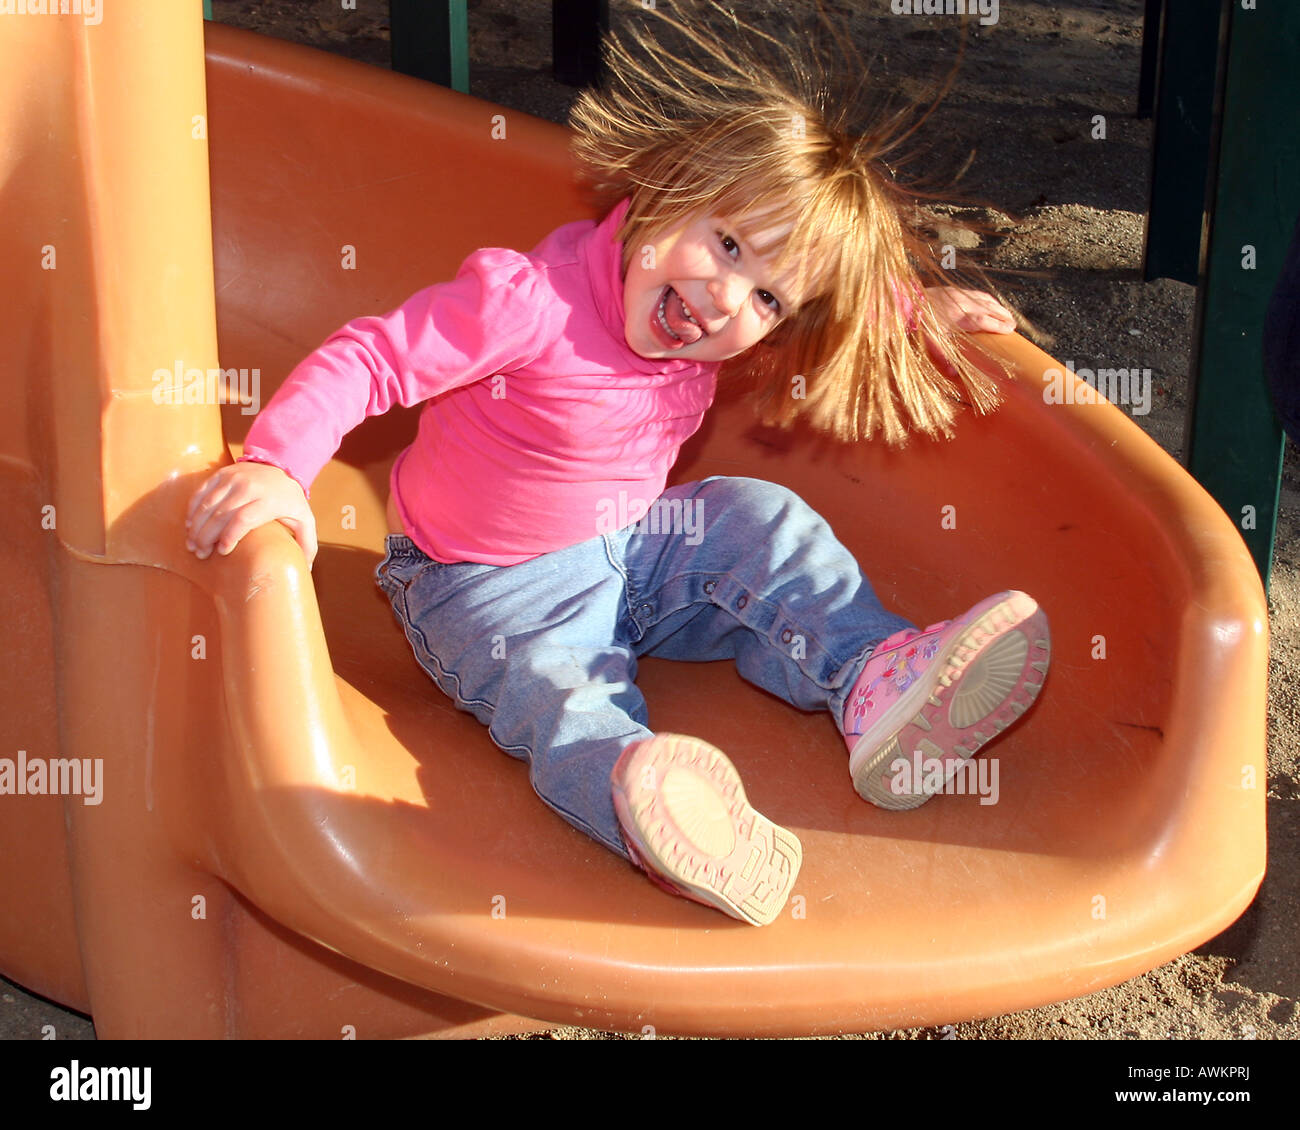 Girl with static electricity in her hair on slide Stock Photo - Alamy